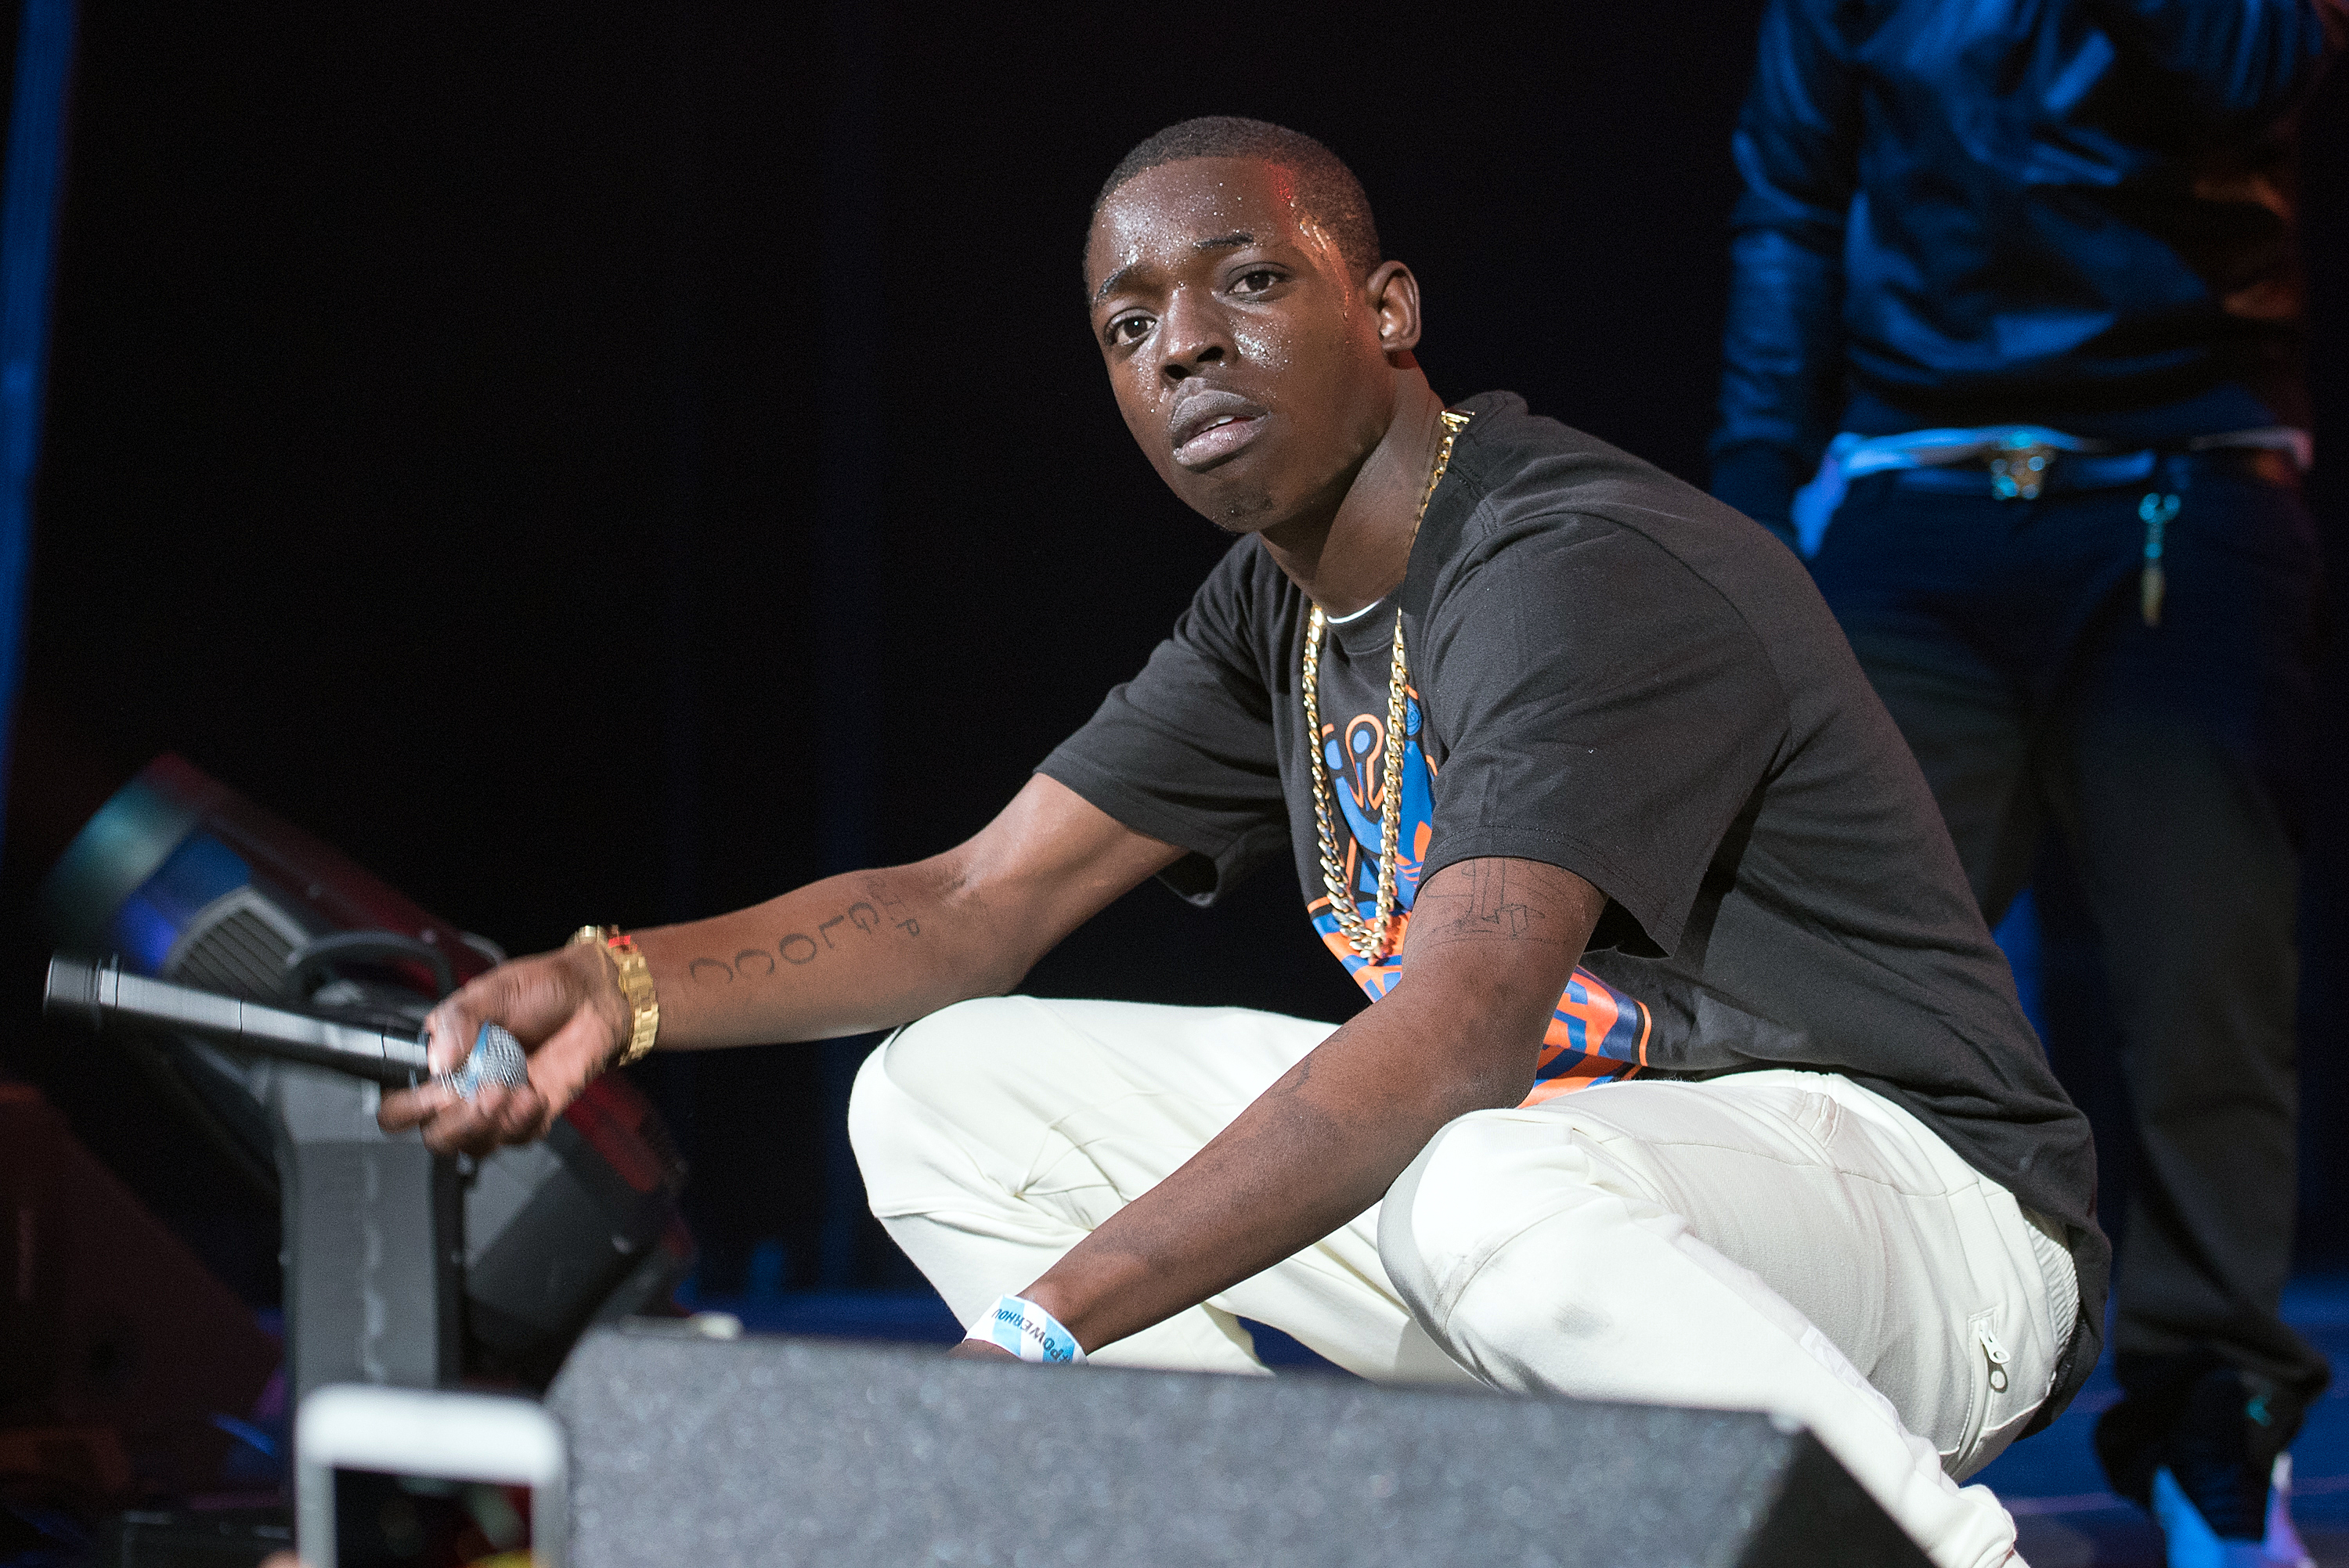 Bobby Shmurda Has Been Sentenced to Seven Years in Prison